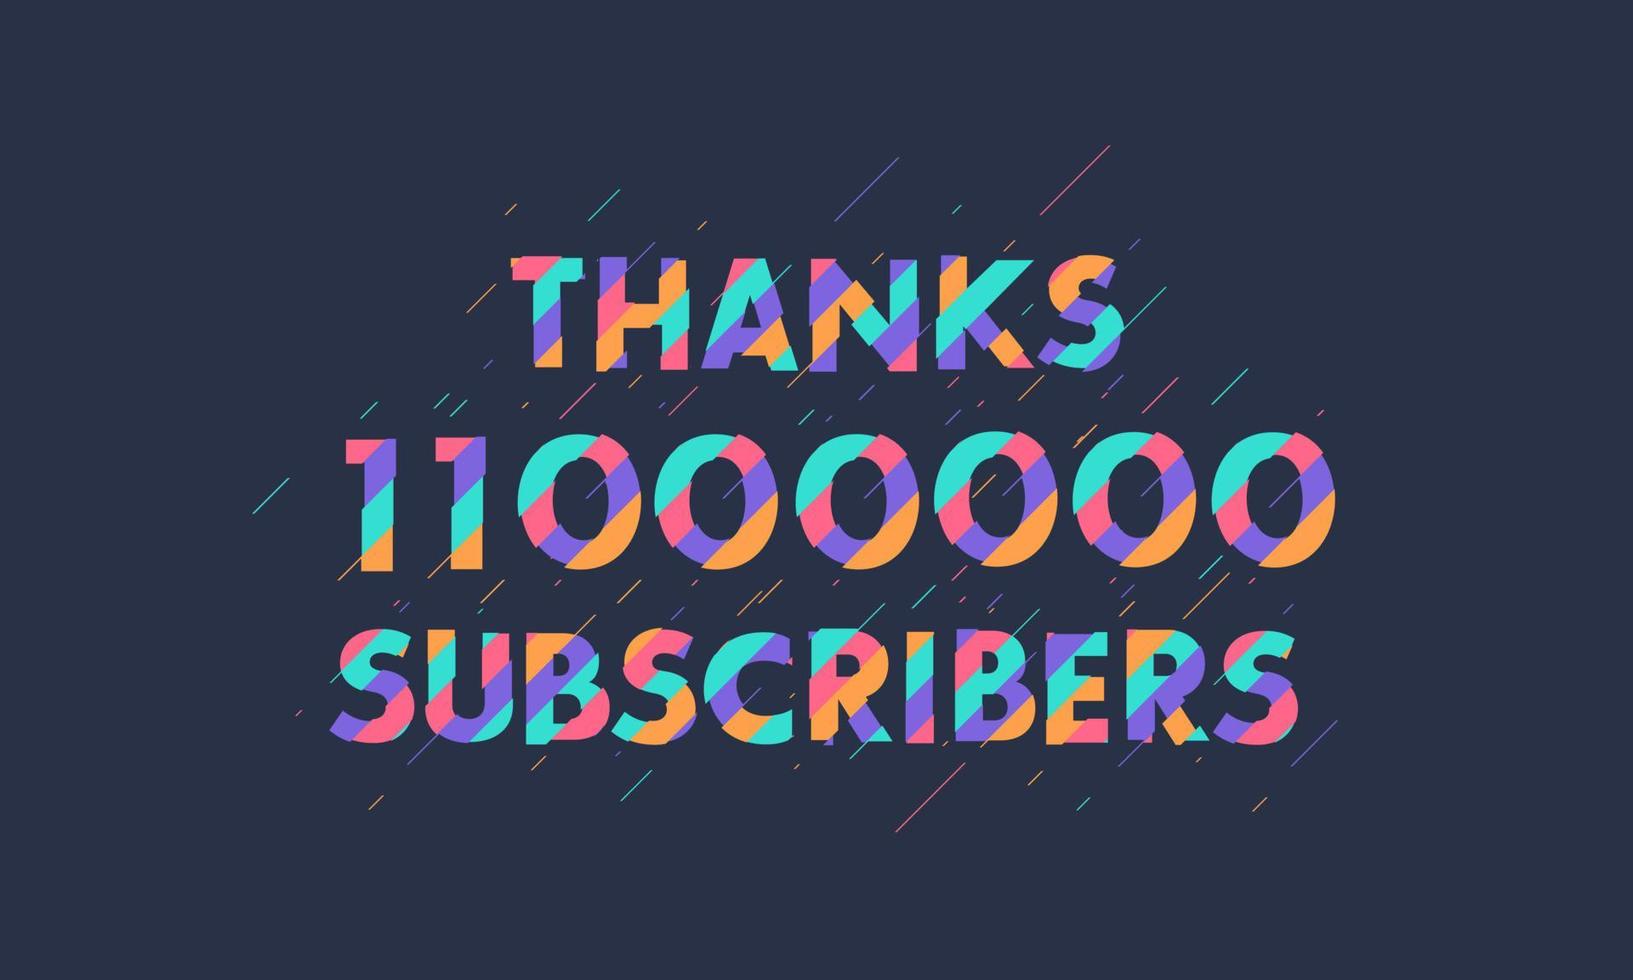 Thanks 11000000 subscribers, 11M subscribers celebration modern colorful design. vector